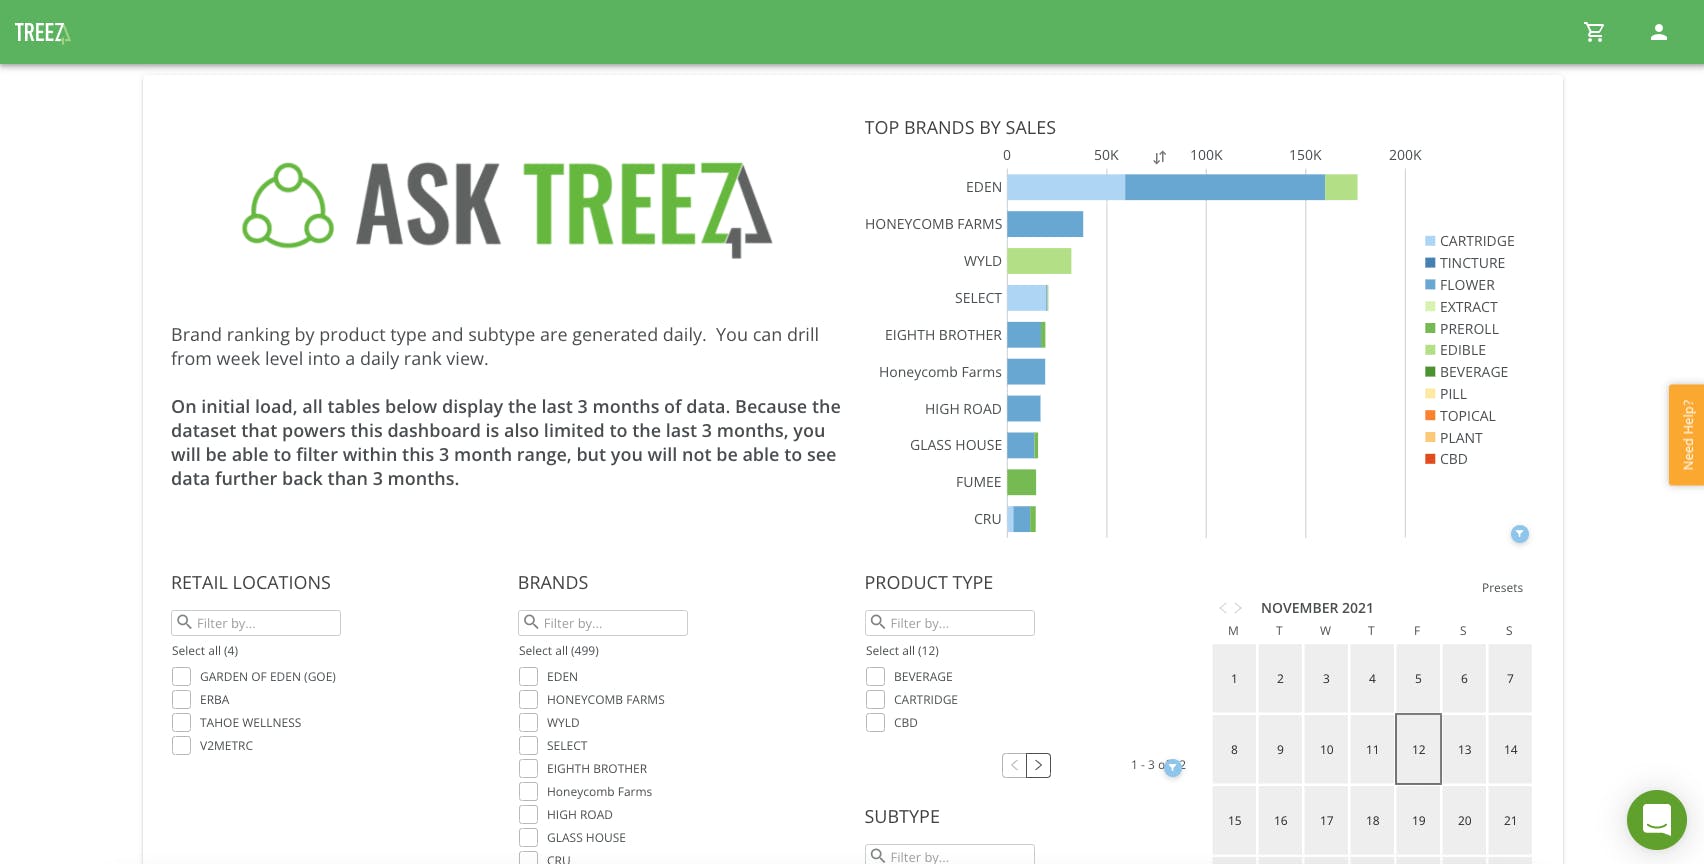 A screenshot of Ask Treez, with the brand ranking by product type and subtype